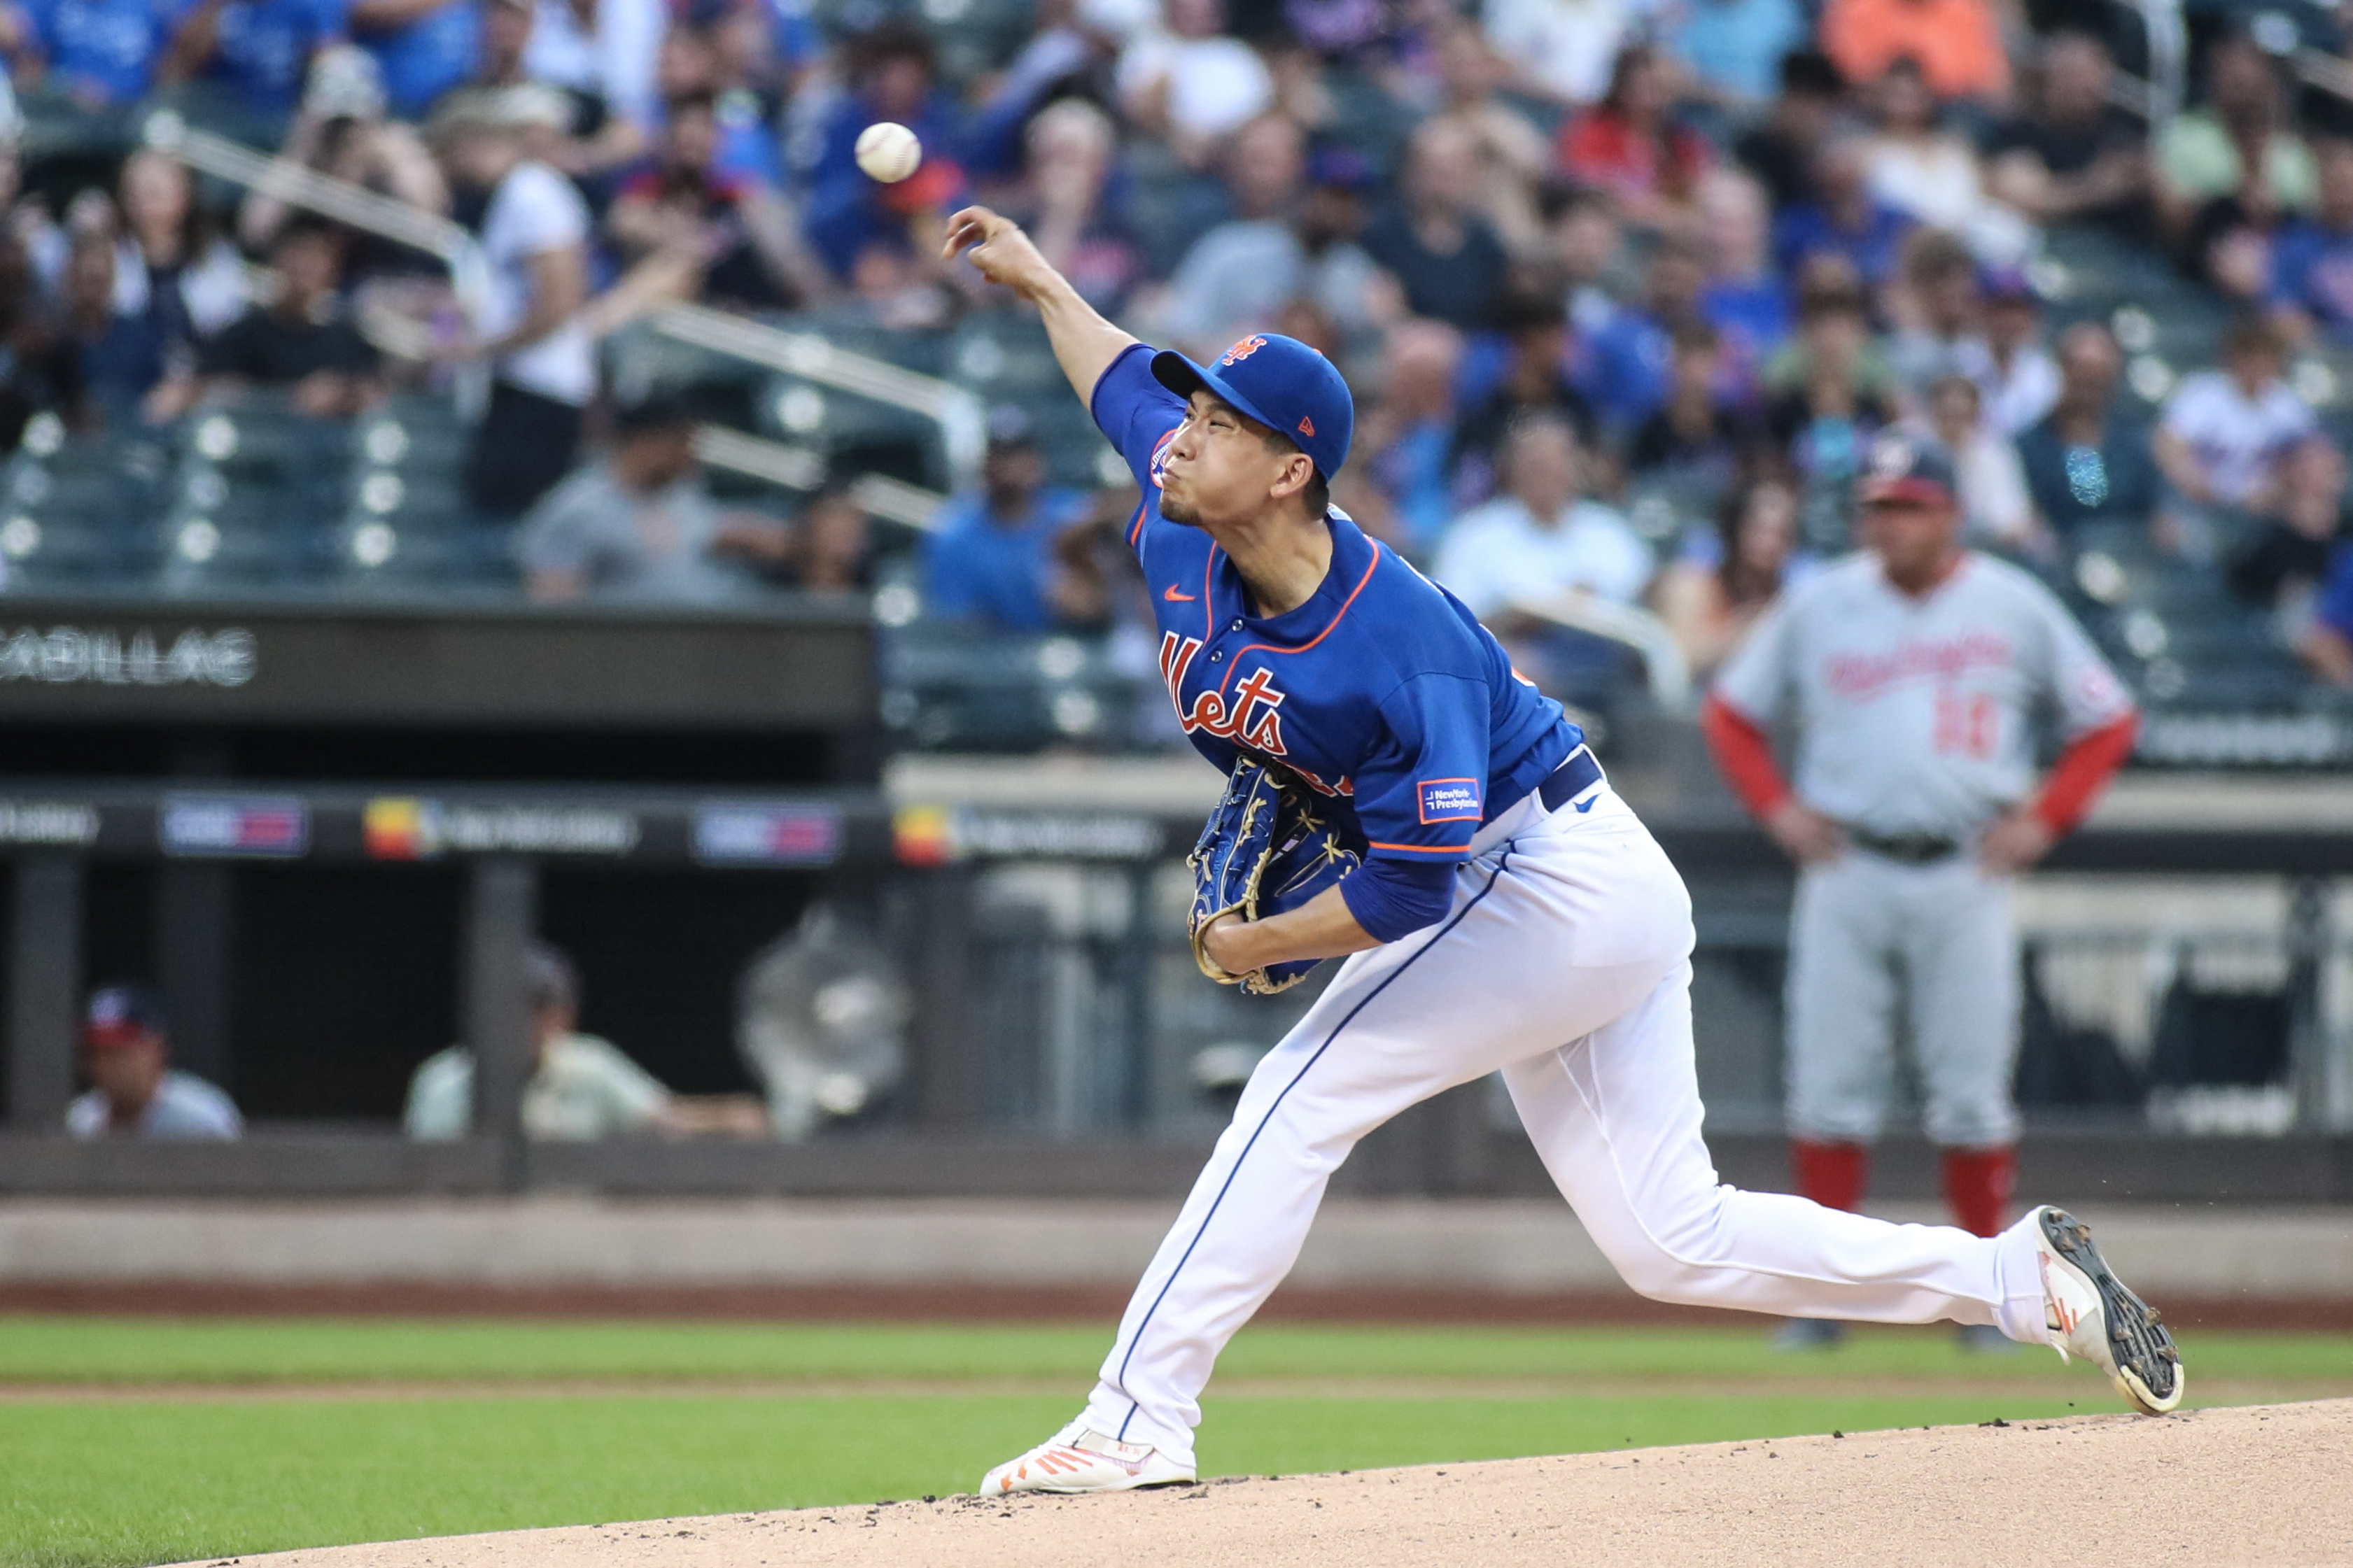 After rain delay, Mets eke out win over Nationals